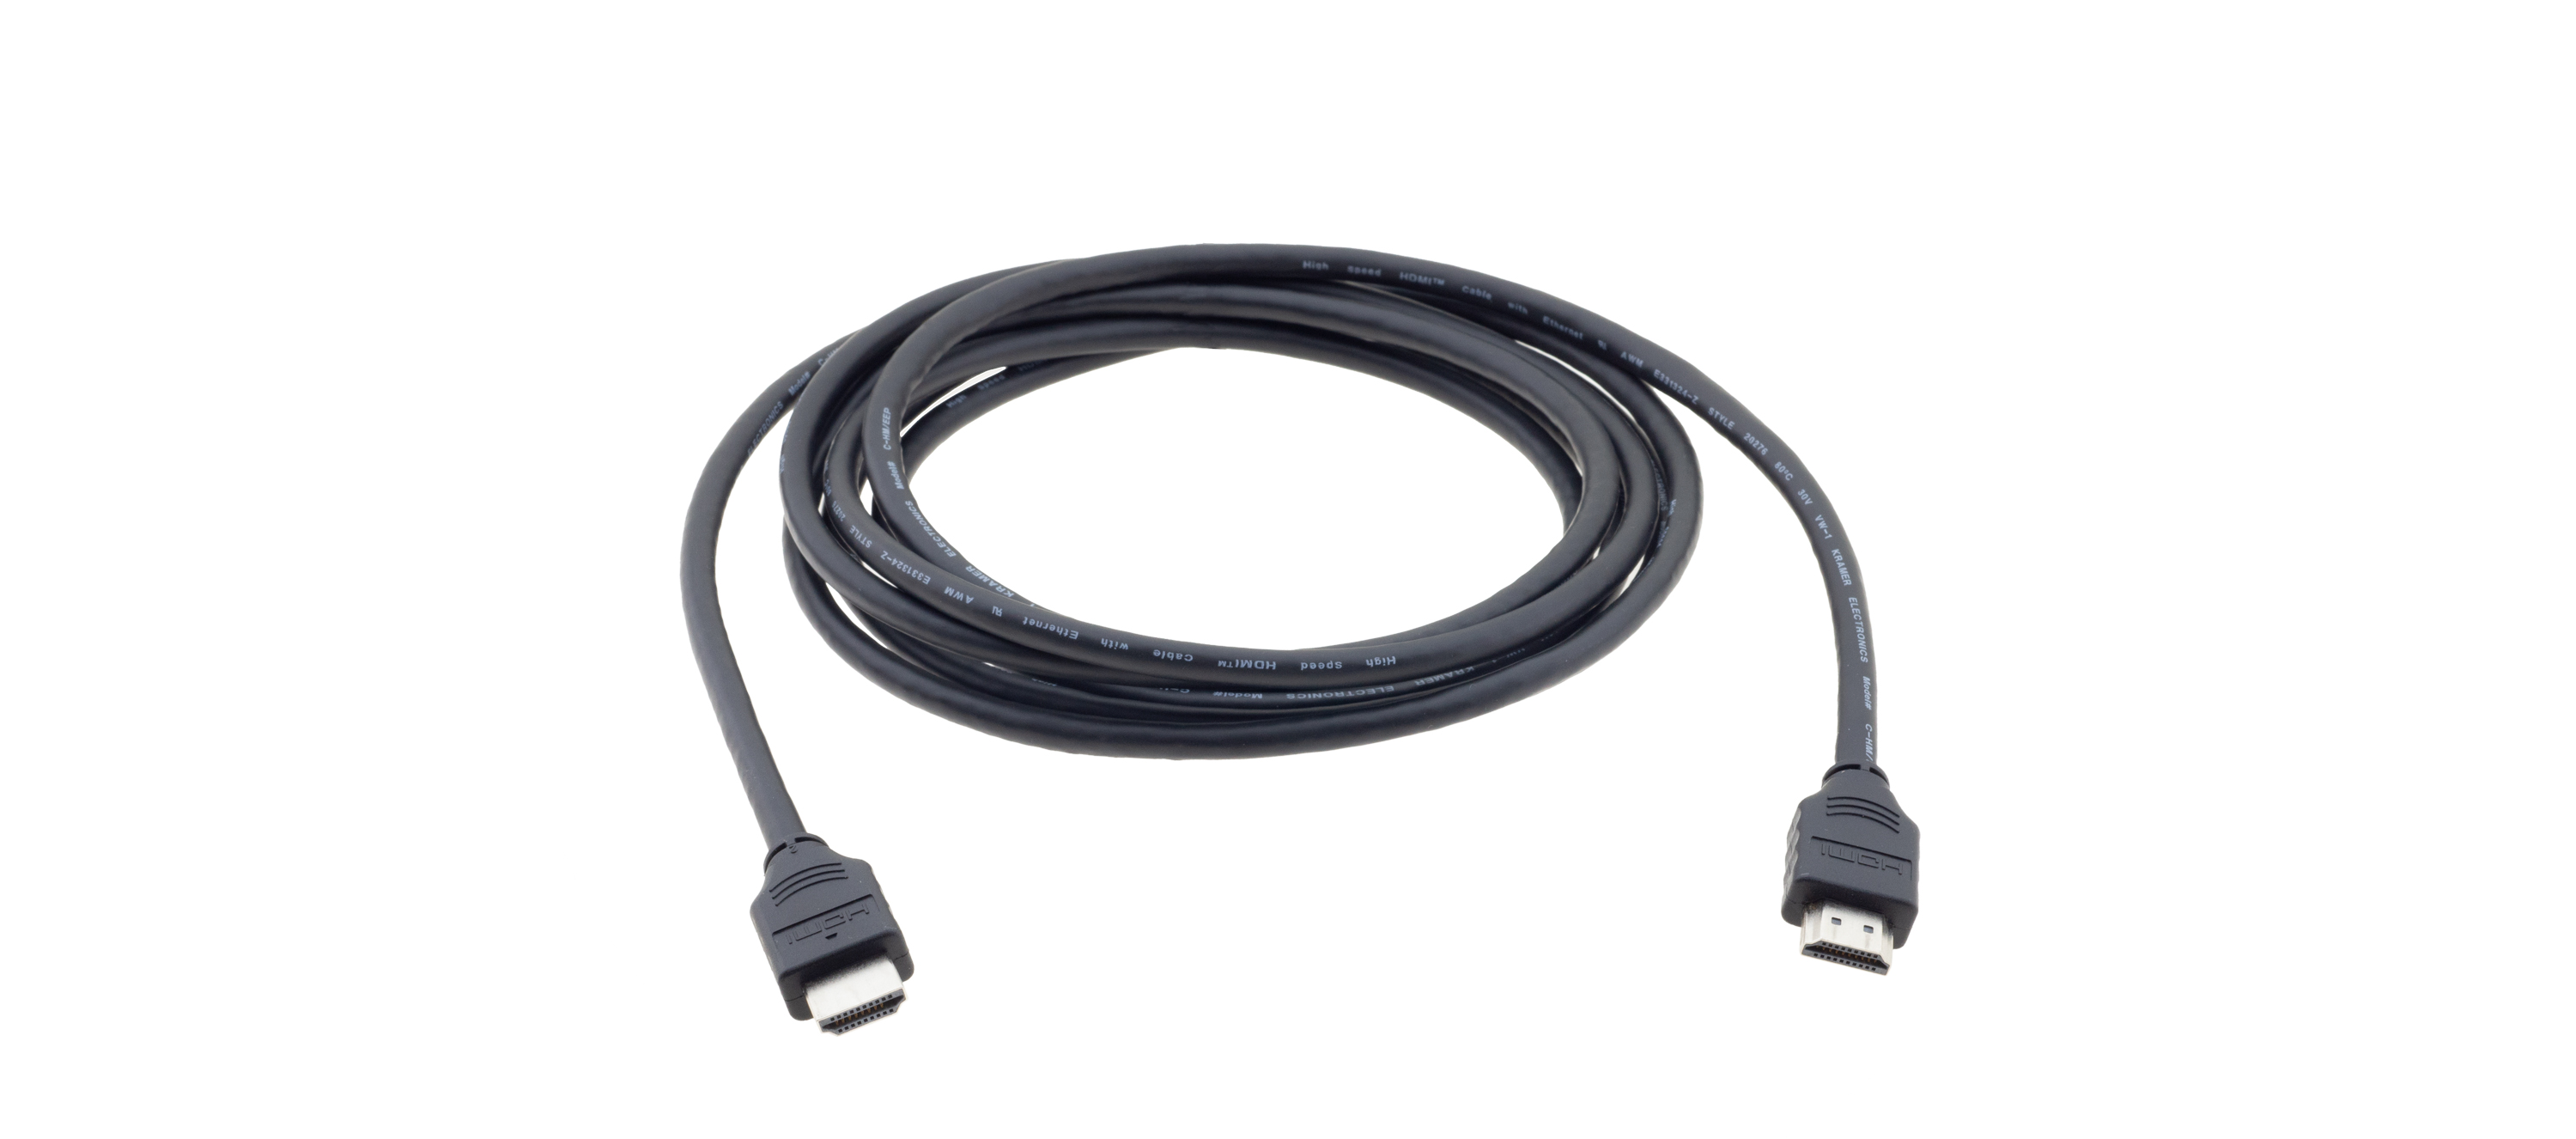 C-HM/EEP-6 High Speed HDMI cable with Ethernet Cable (6')